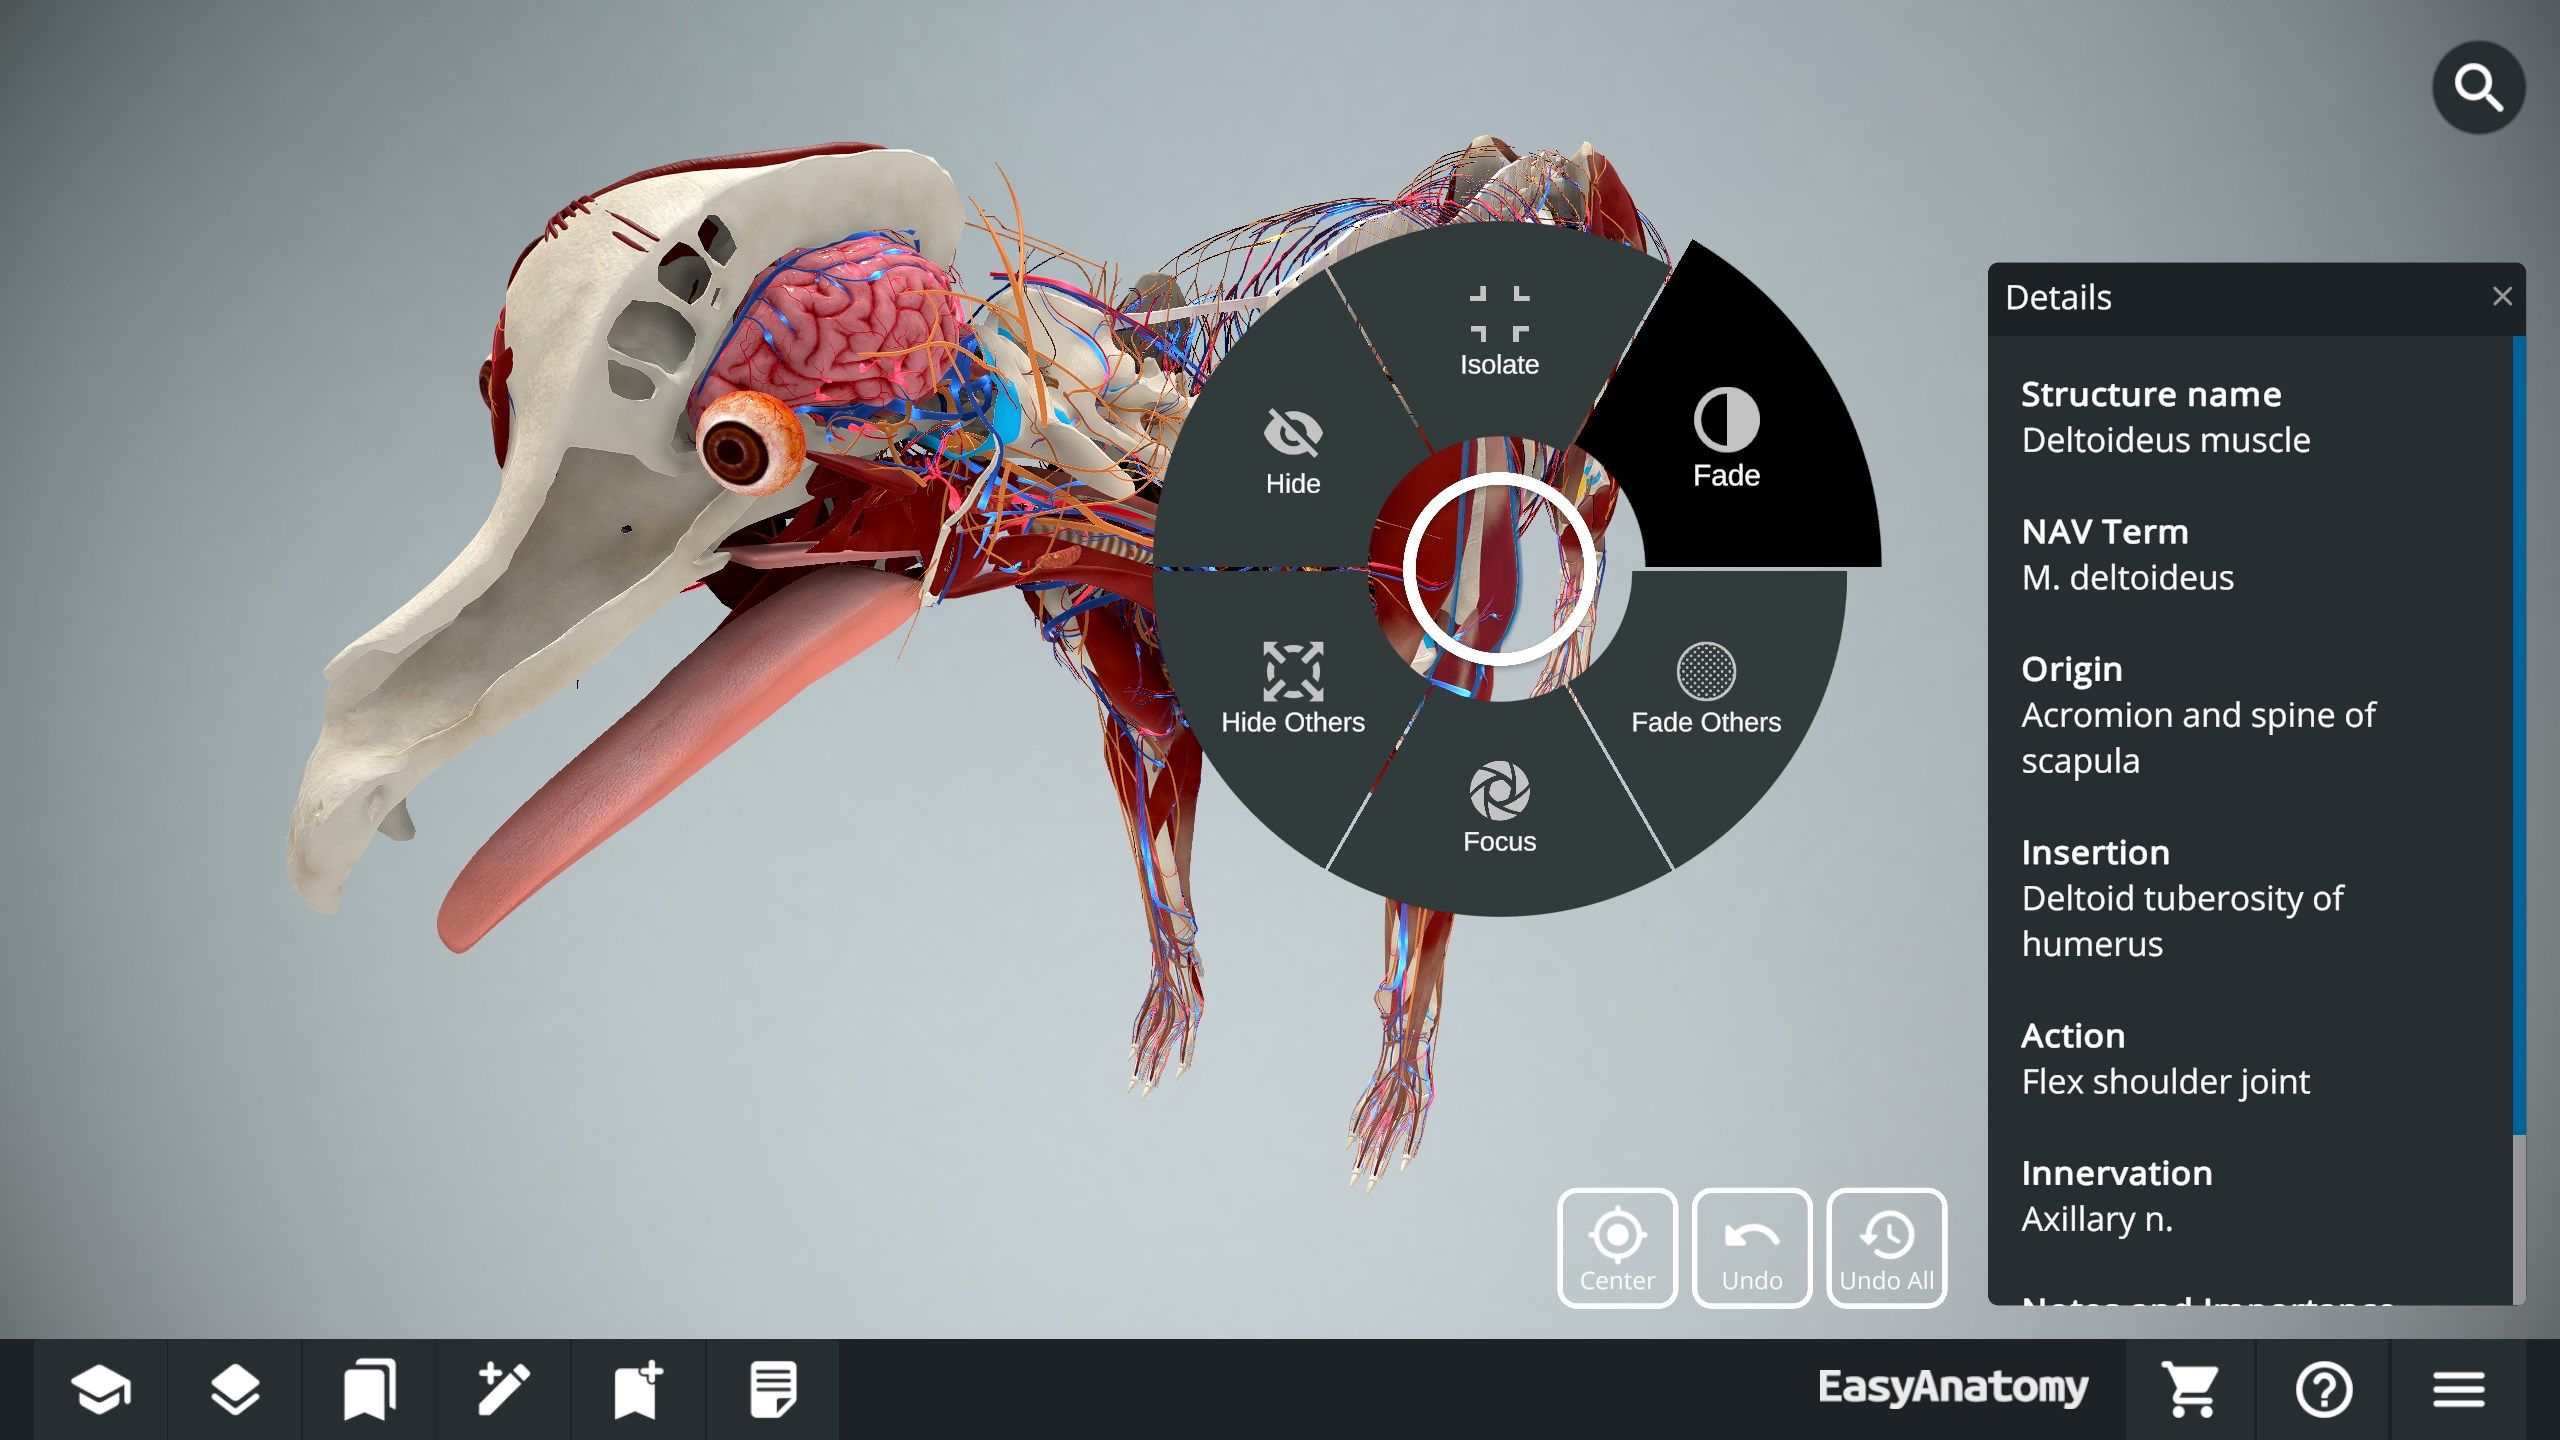 Peel away layers, hide and isolate individual components and regions, and make components transparent to see how they are positionally and functionally related with EasyAnatomy's virtual dissection radial menu.